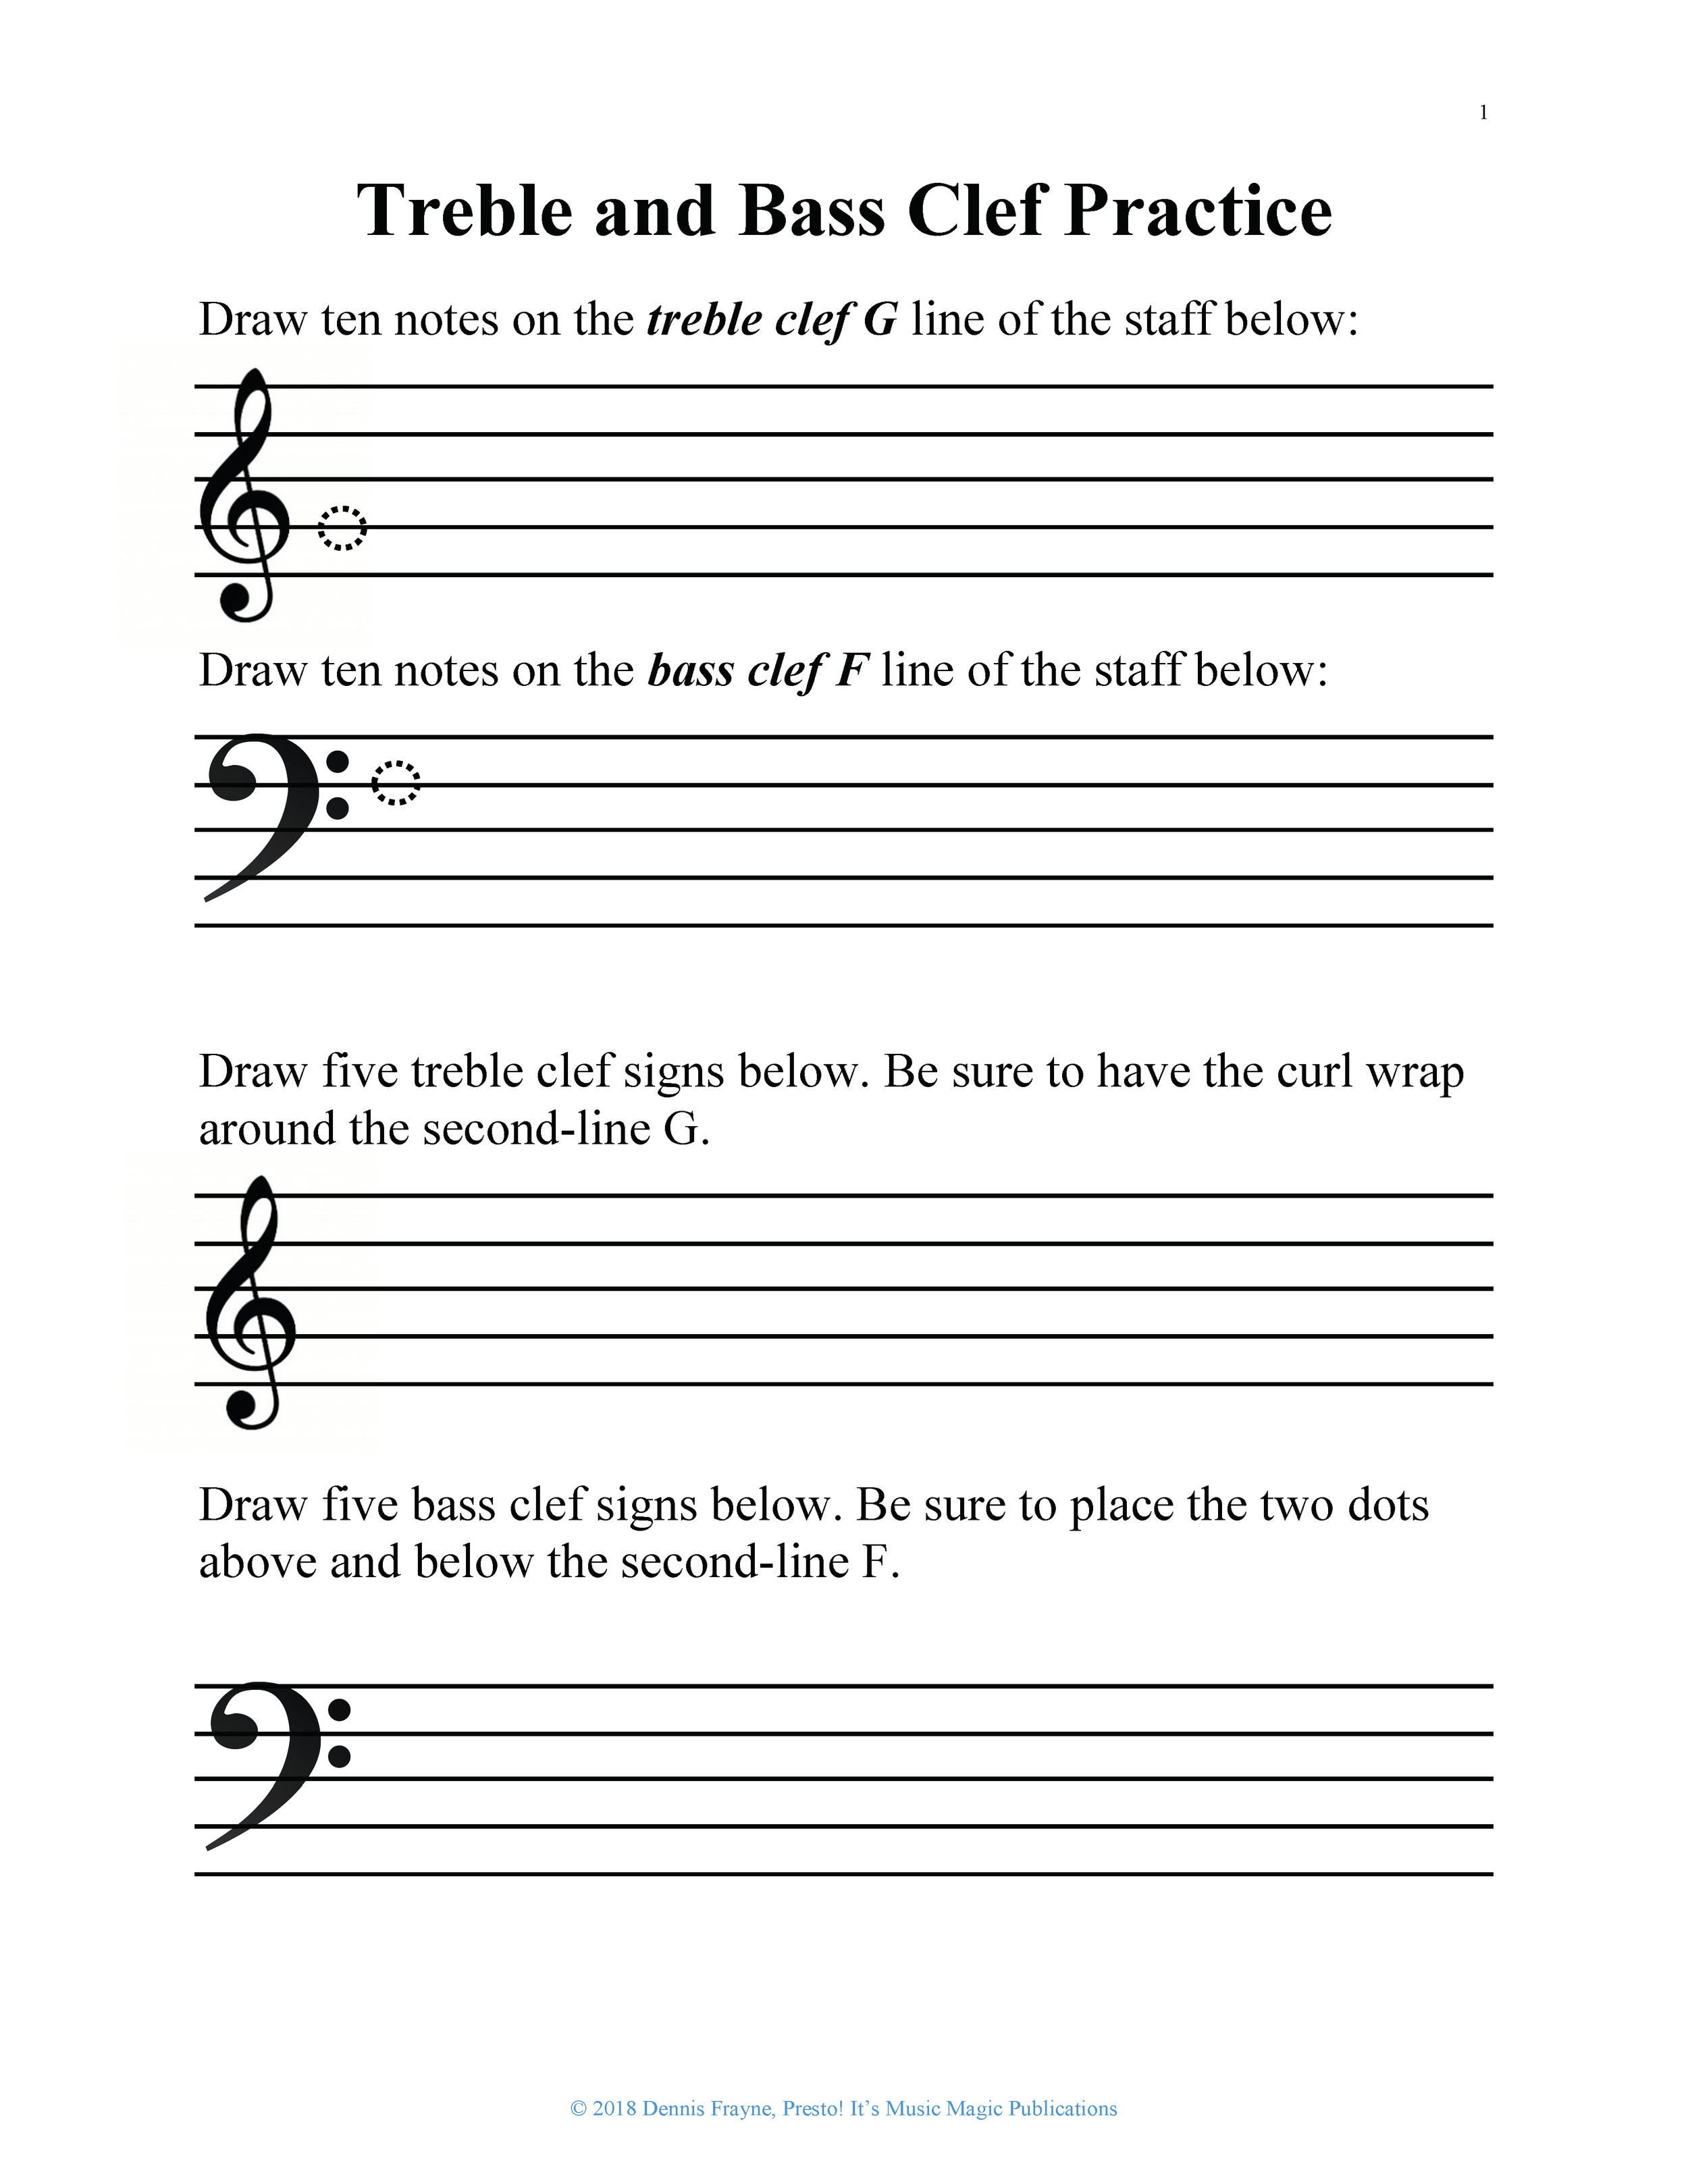 learn-to-draw-treble-clef-worksheet-for-kids-jaka-attacker